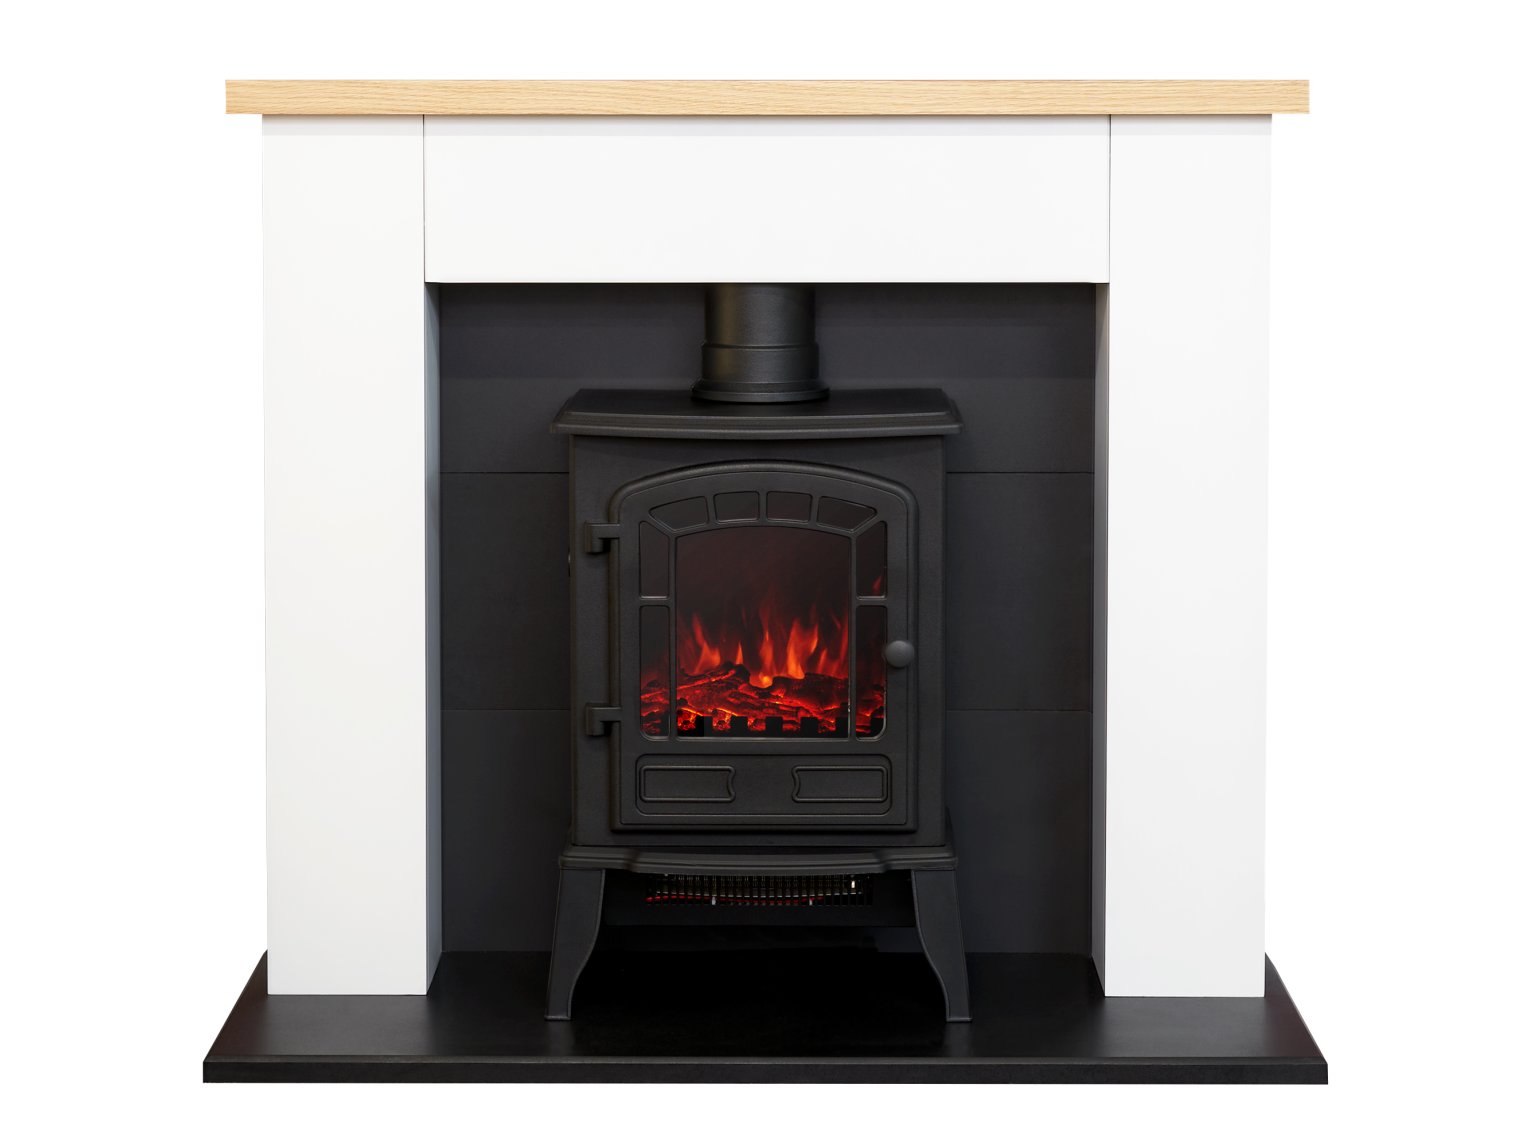 Adam Chester Fireplace in Pure White with Ripon Electric Stove in Black, 39 Inch